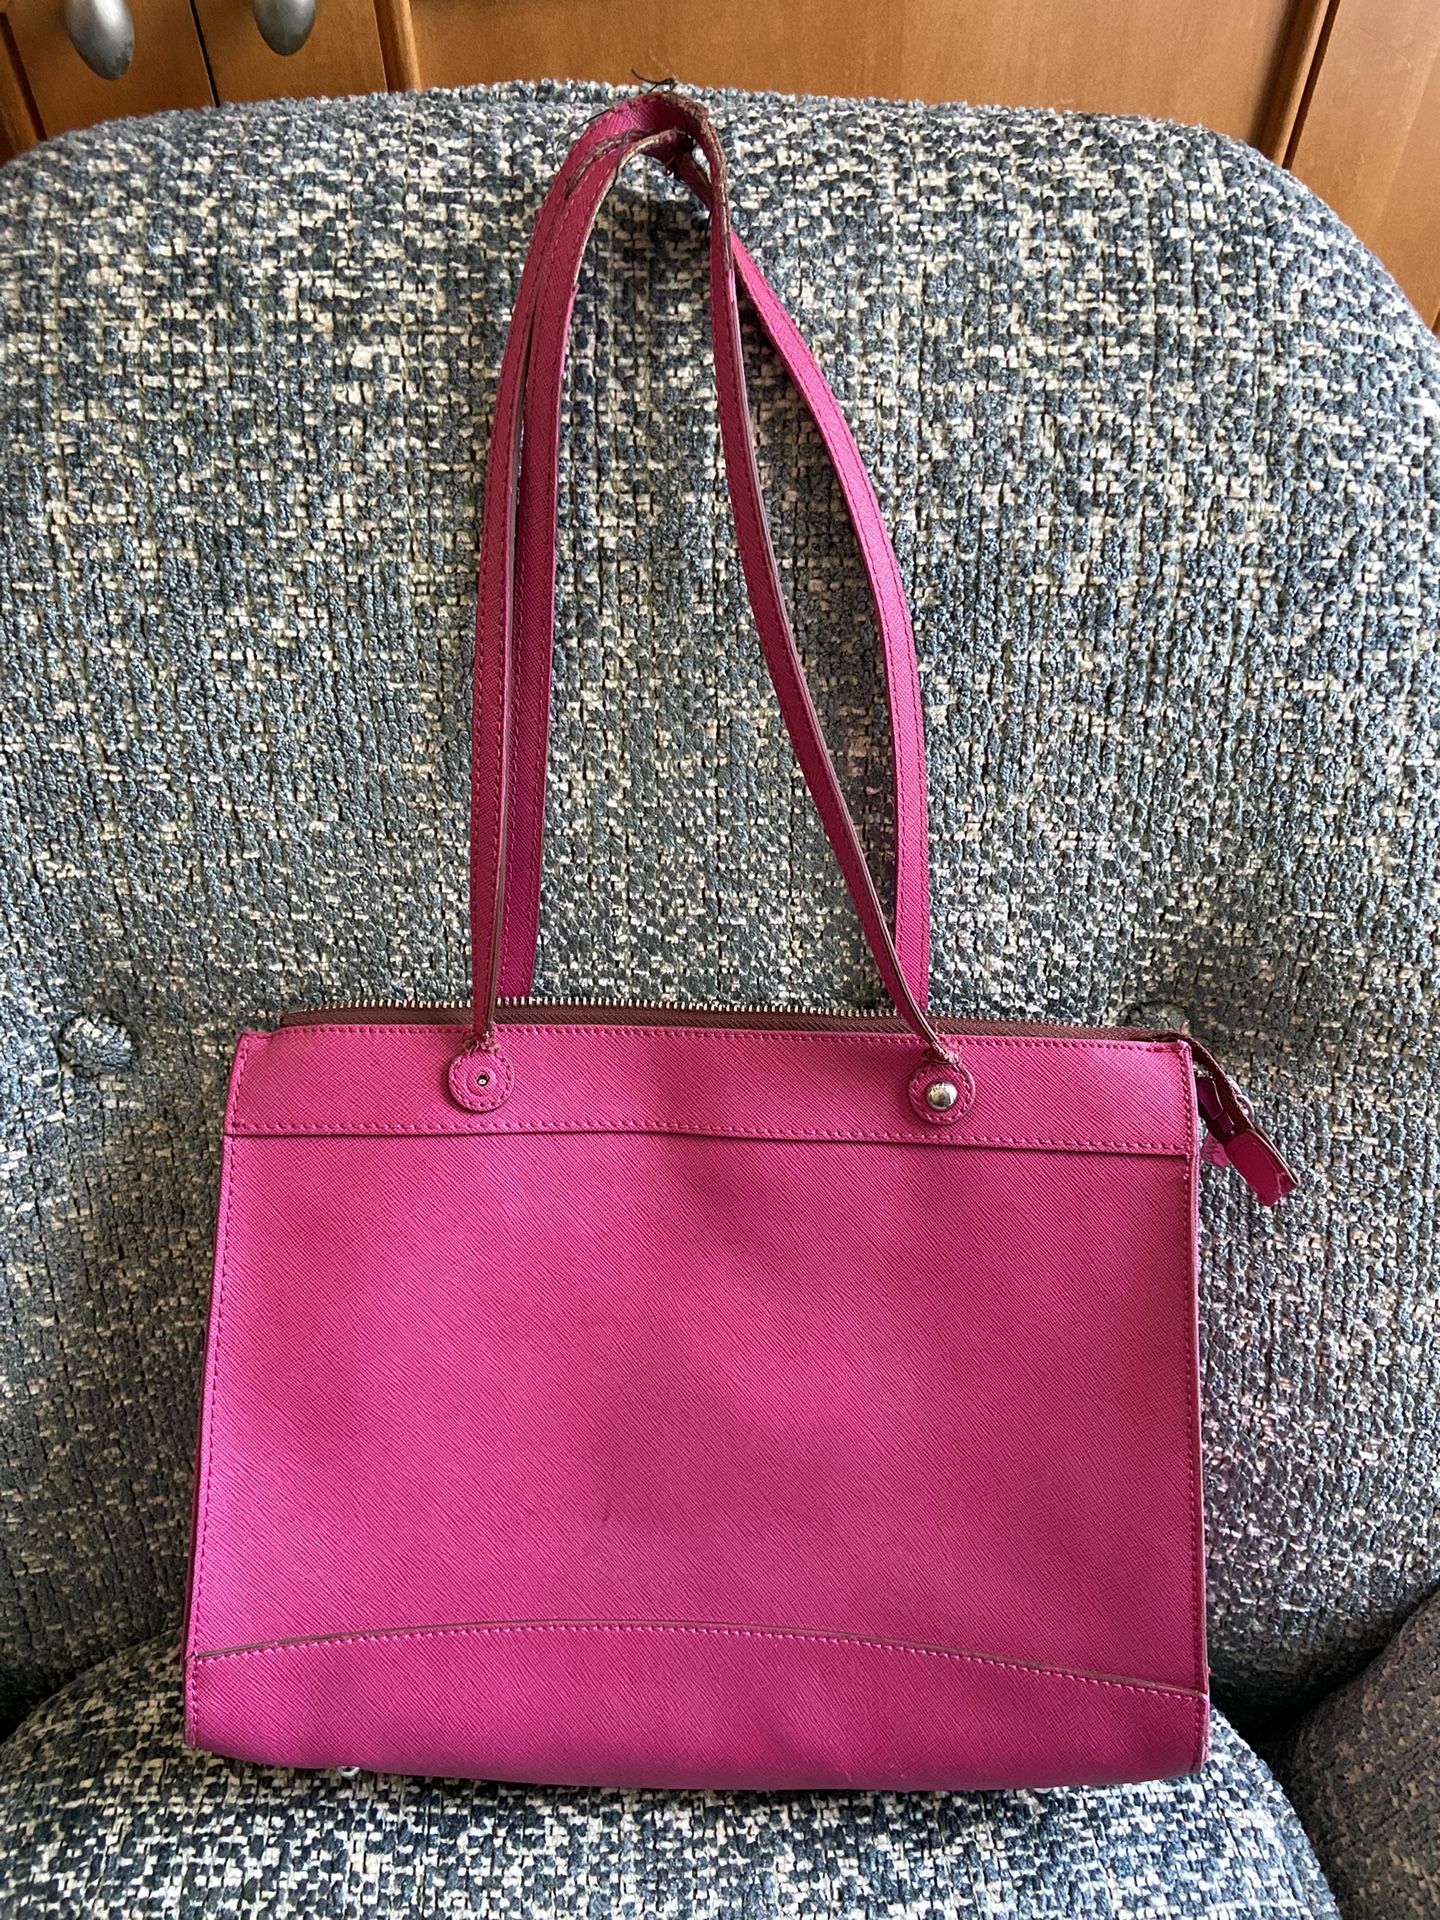 Pink leather Hobo purse